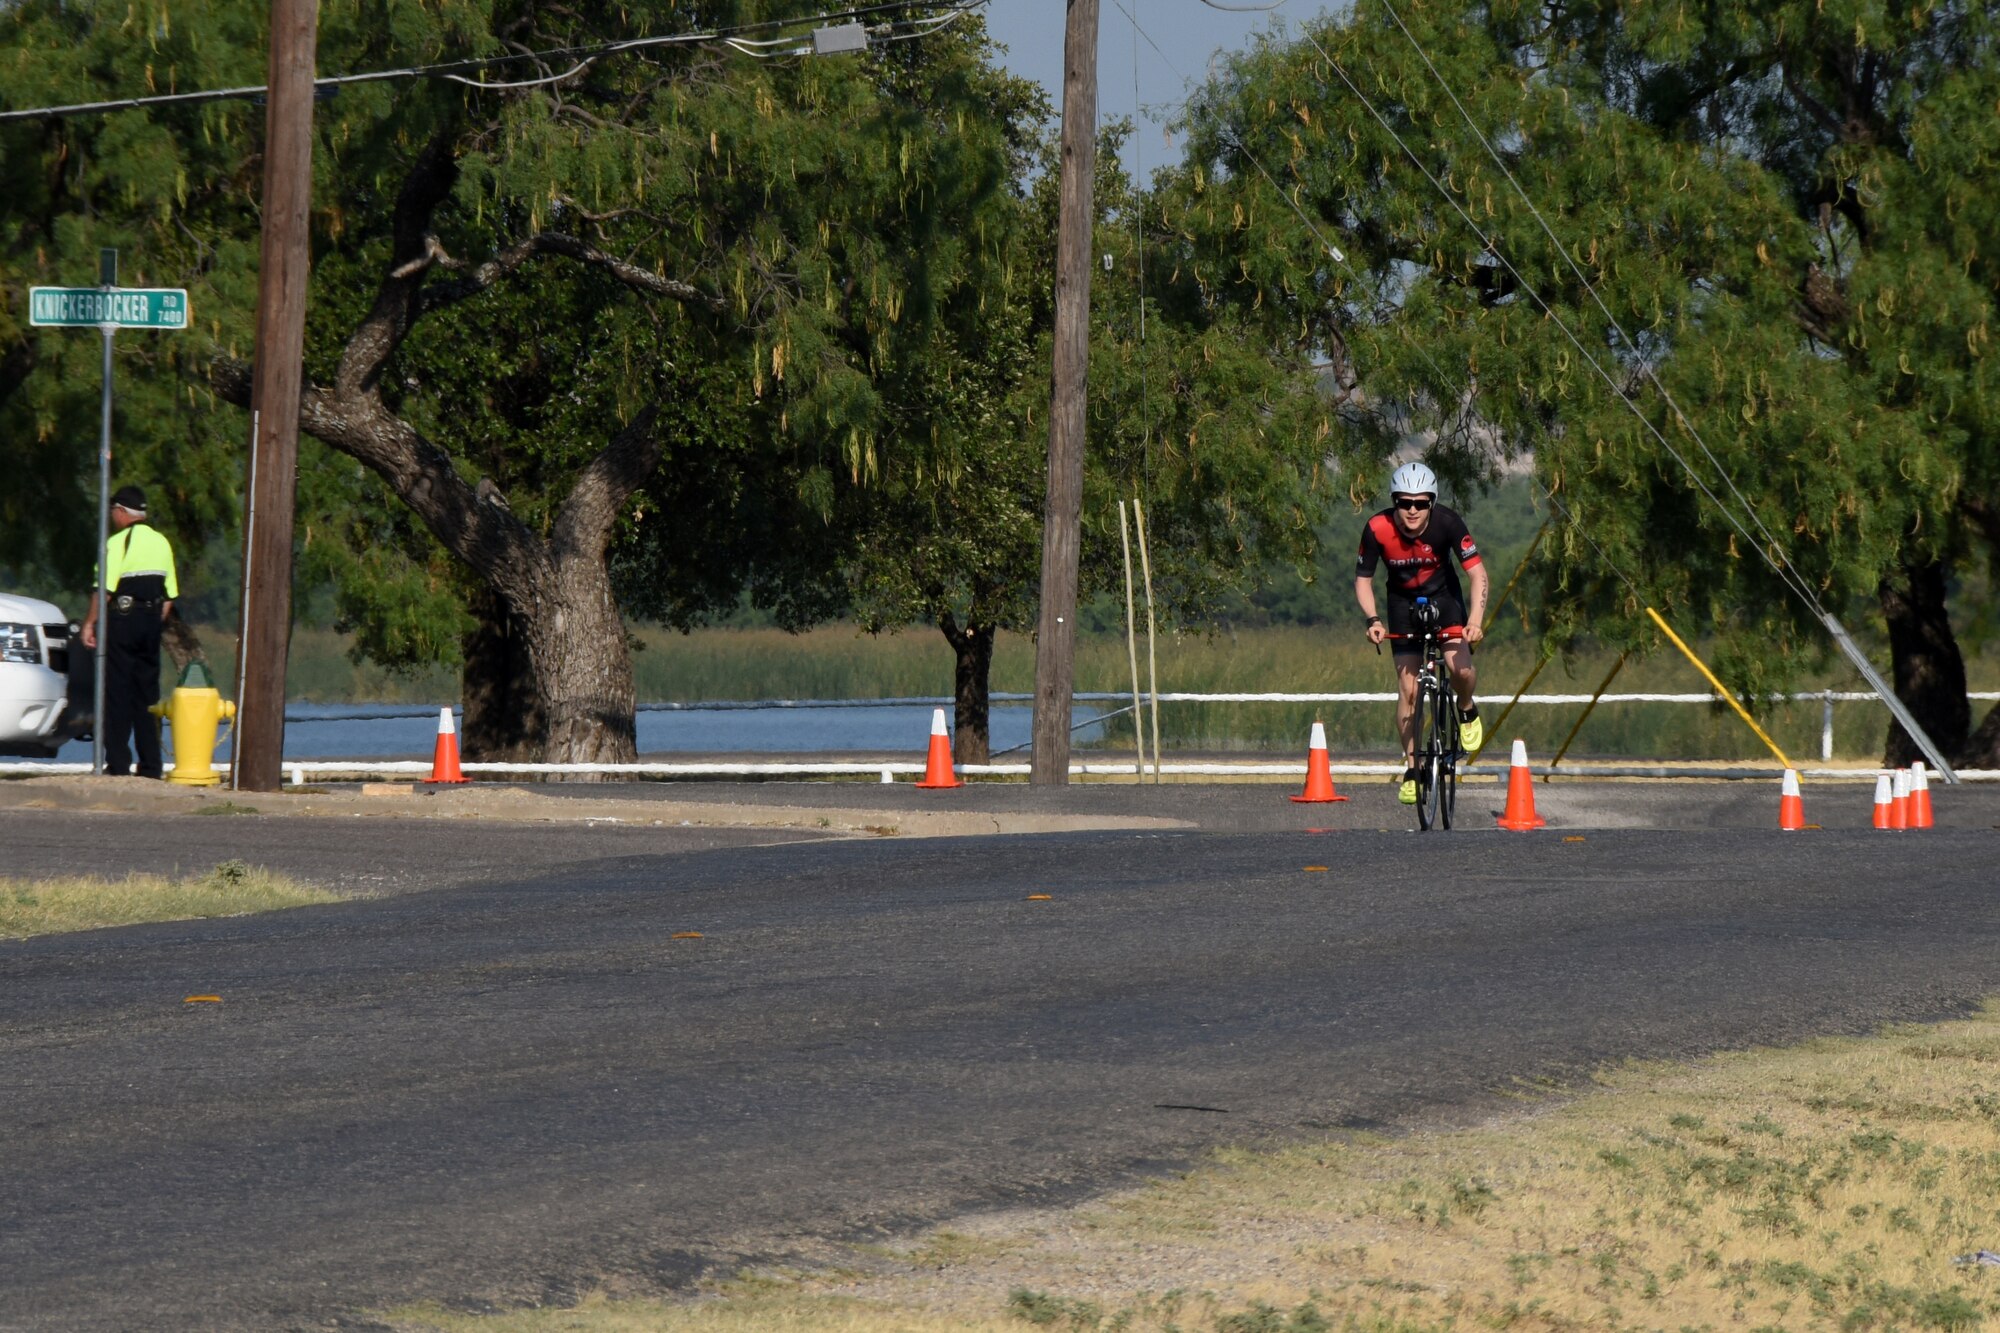 Triathlon participant Josh Holtkort, rounds a turn on his way towards the end of the 20K cycling section of the Goodfellow Annual Triathlon at the Goodfellow Air Force Base Recreation Camp San Angelo, Texas, July 28, 2018. Once participants were done with the cycling portion of the triathlon, there was a 5K run left between them and the finish line. (U.S. Air Force photo by Airman 1st Class Zachary Chapman/Released)